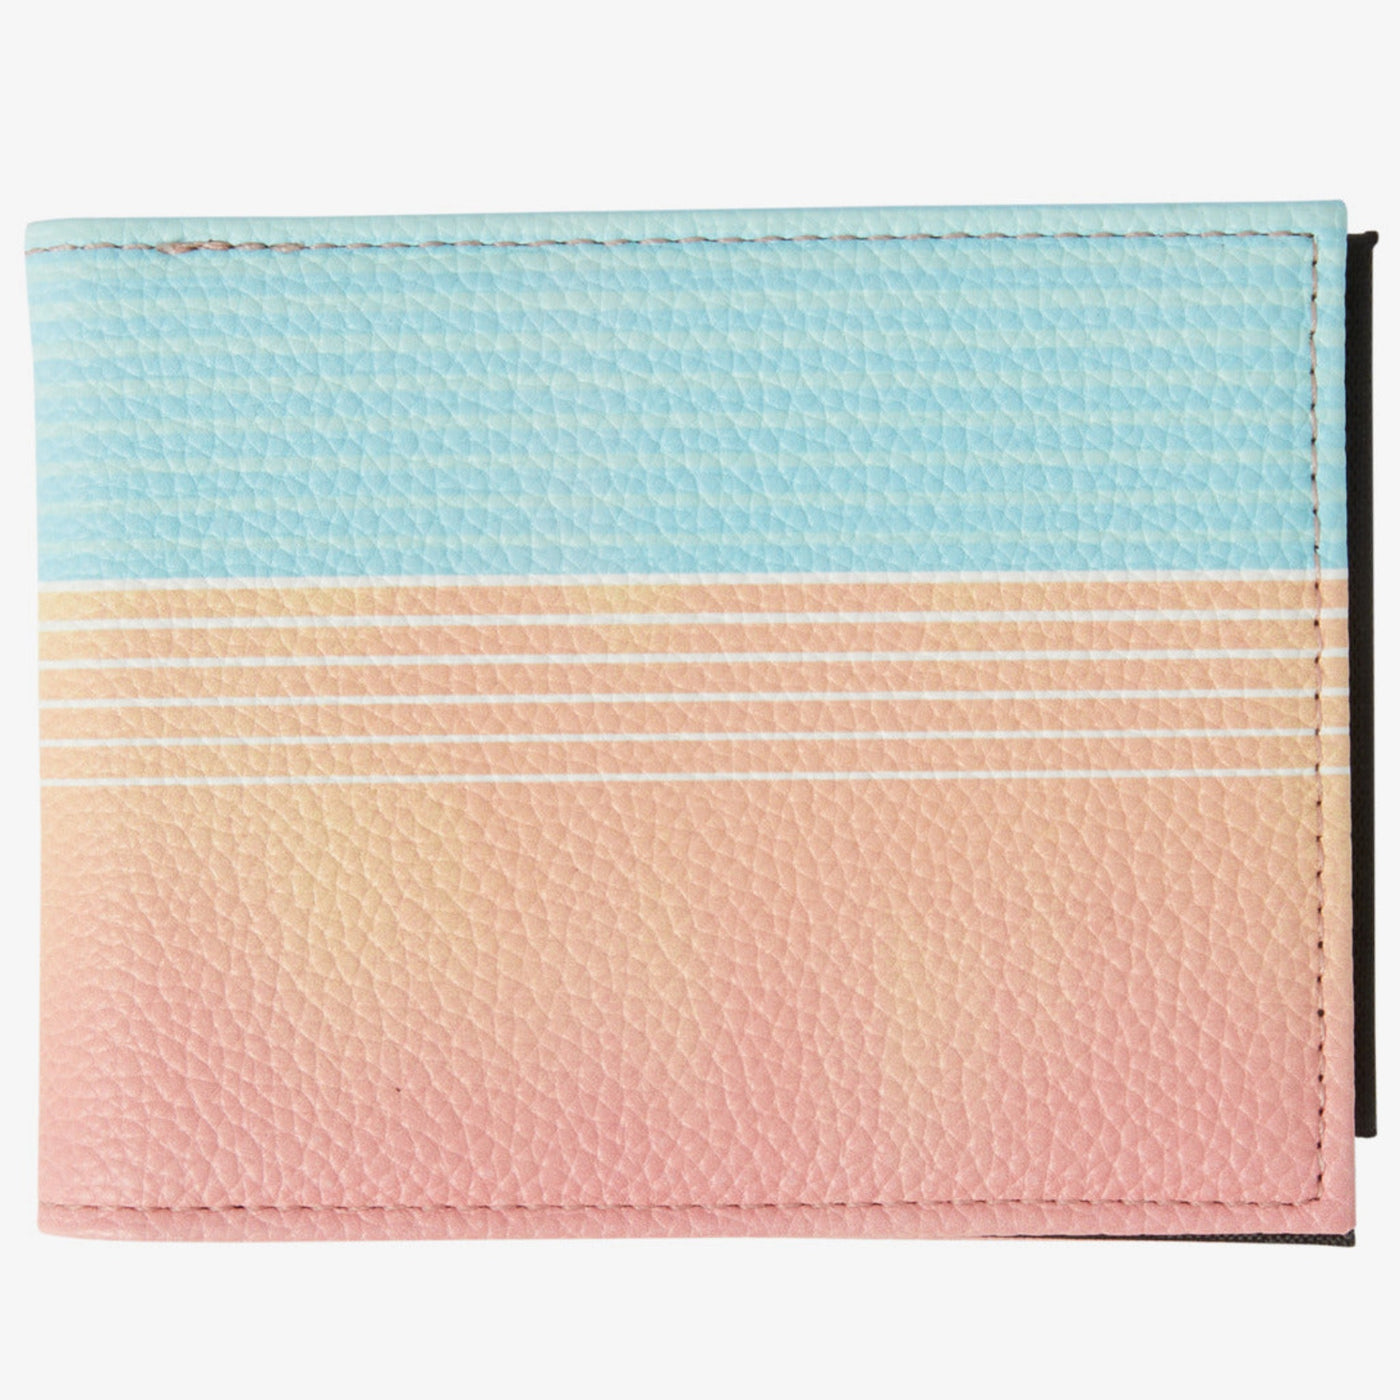 Quiksilver Freshness Tri-Fold Wallet - Fiery Coral